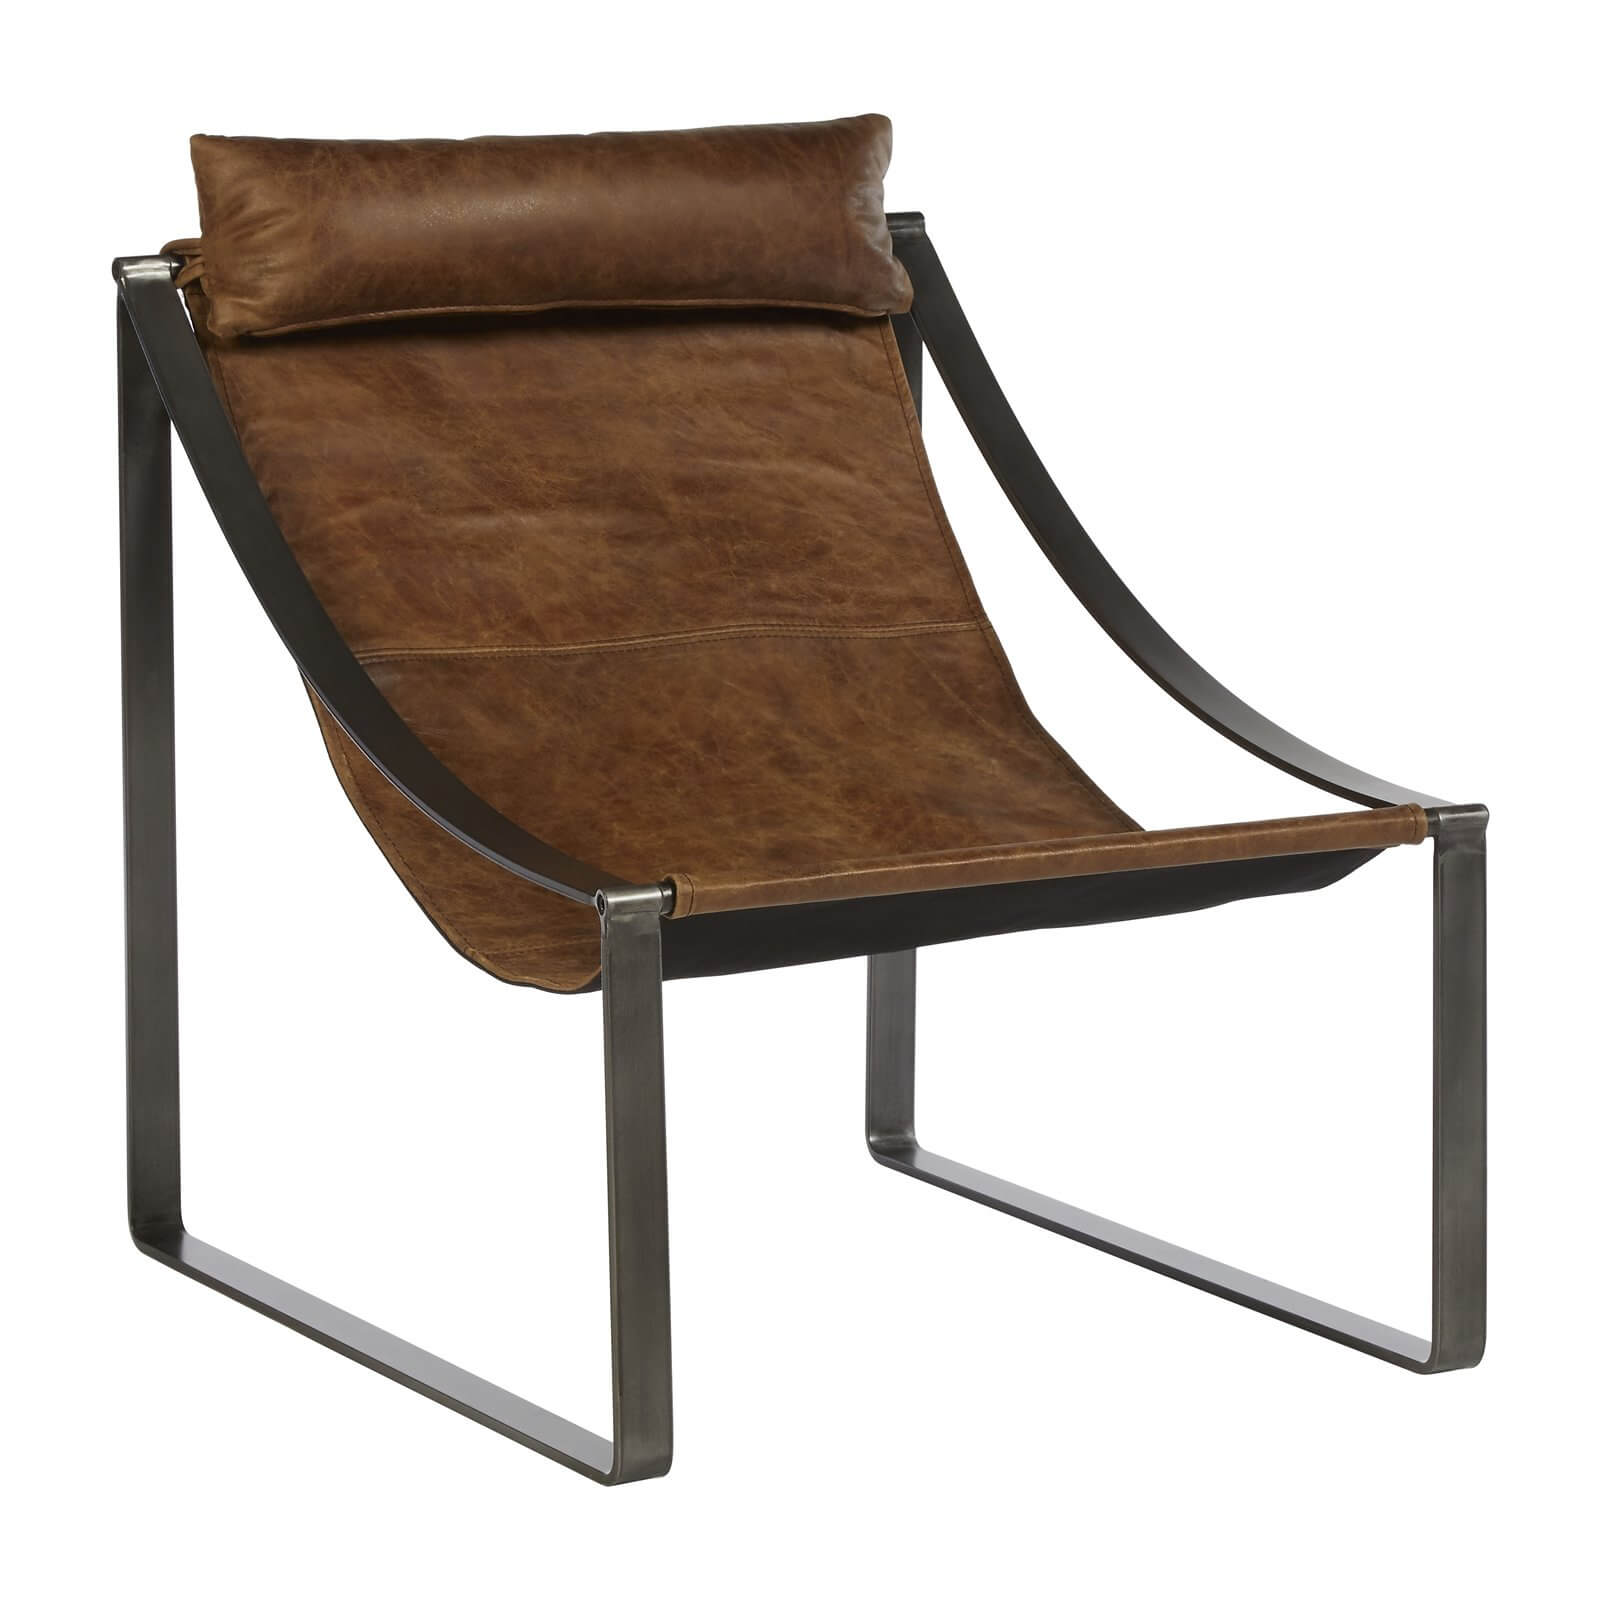 Hoxton Leather Chair - Light Brown